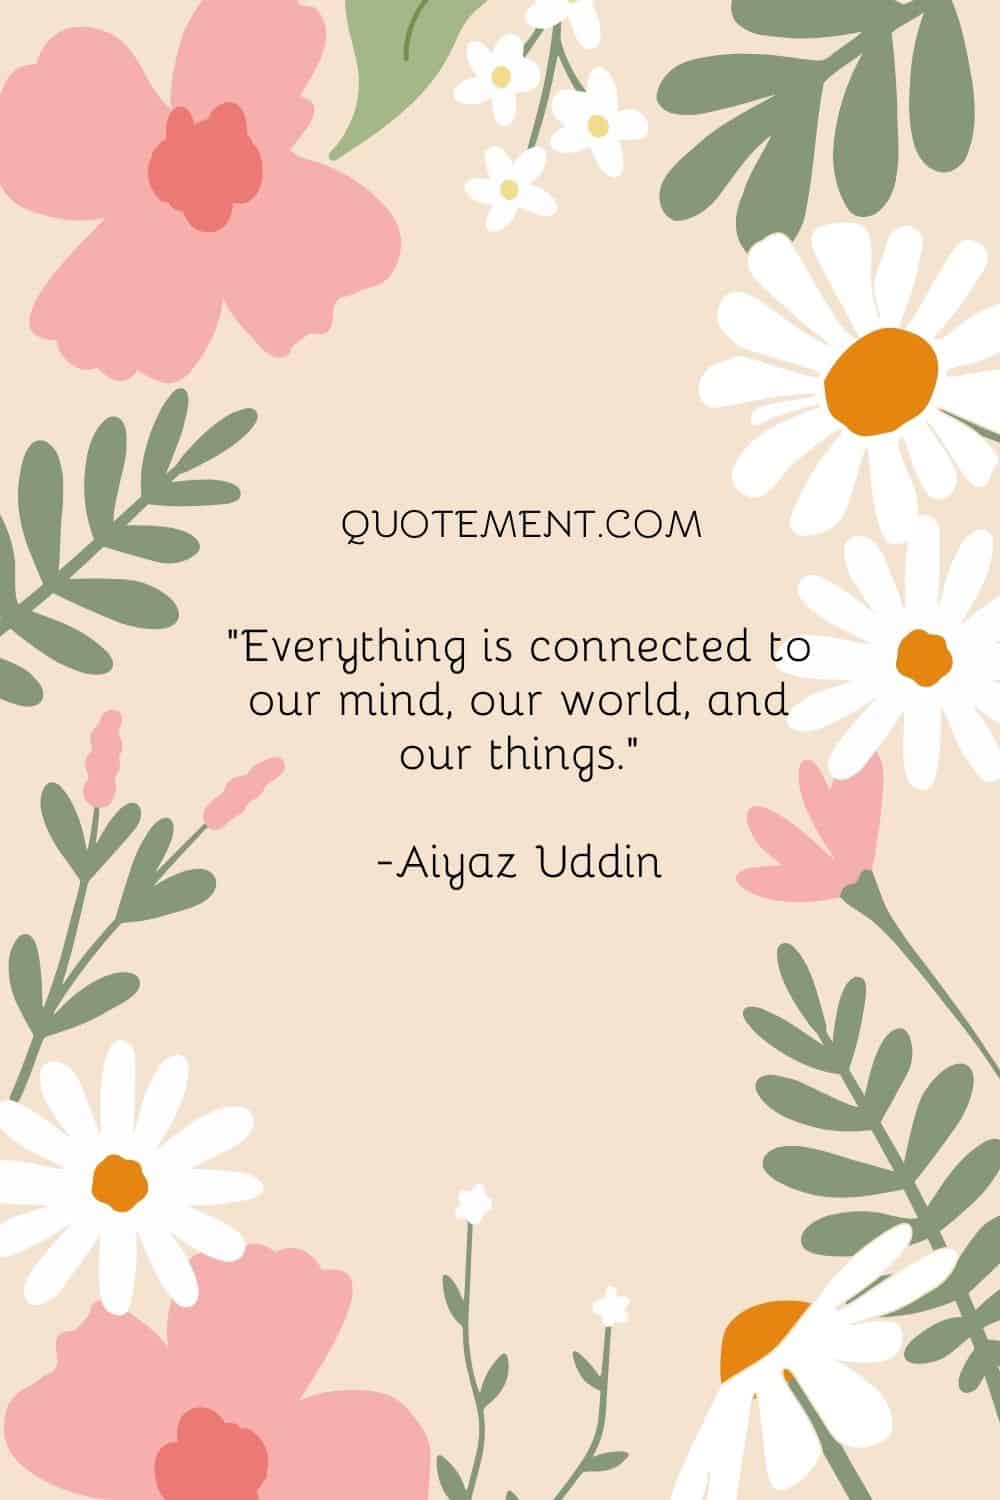 Everything is connected to our mind, our world, and our things.